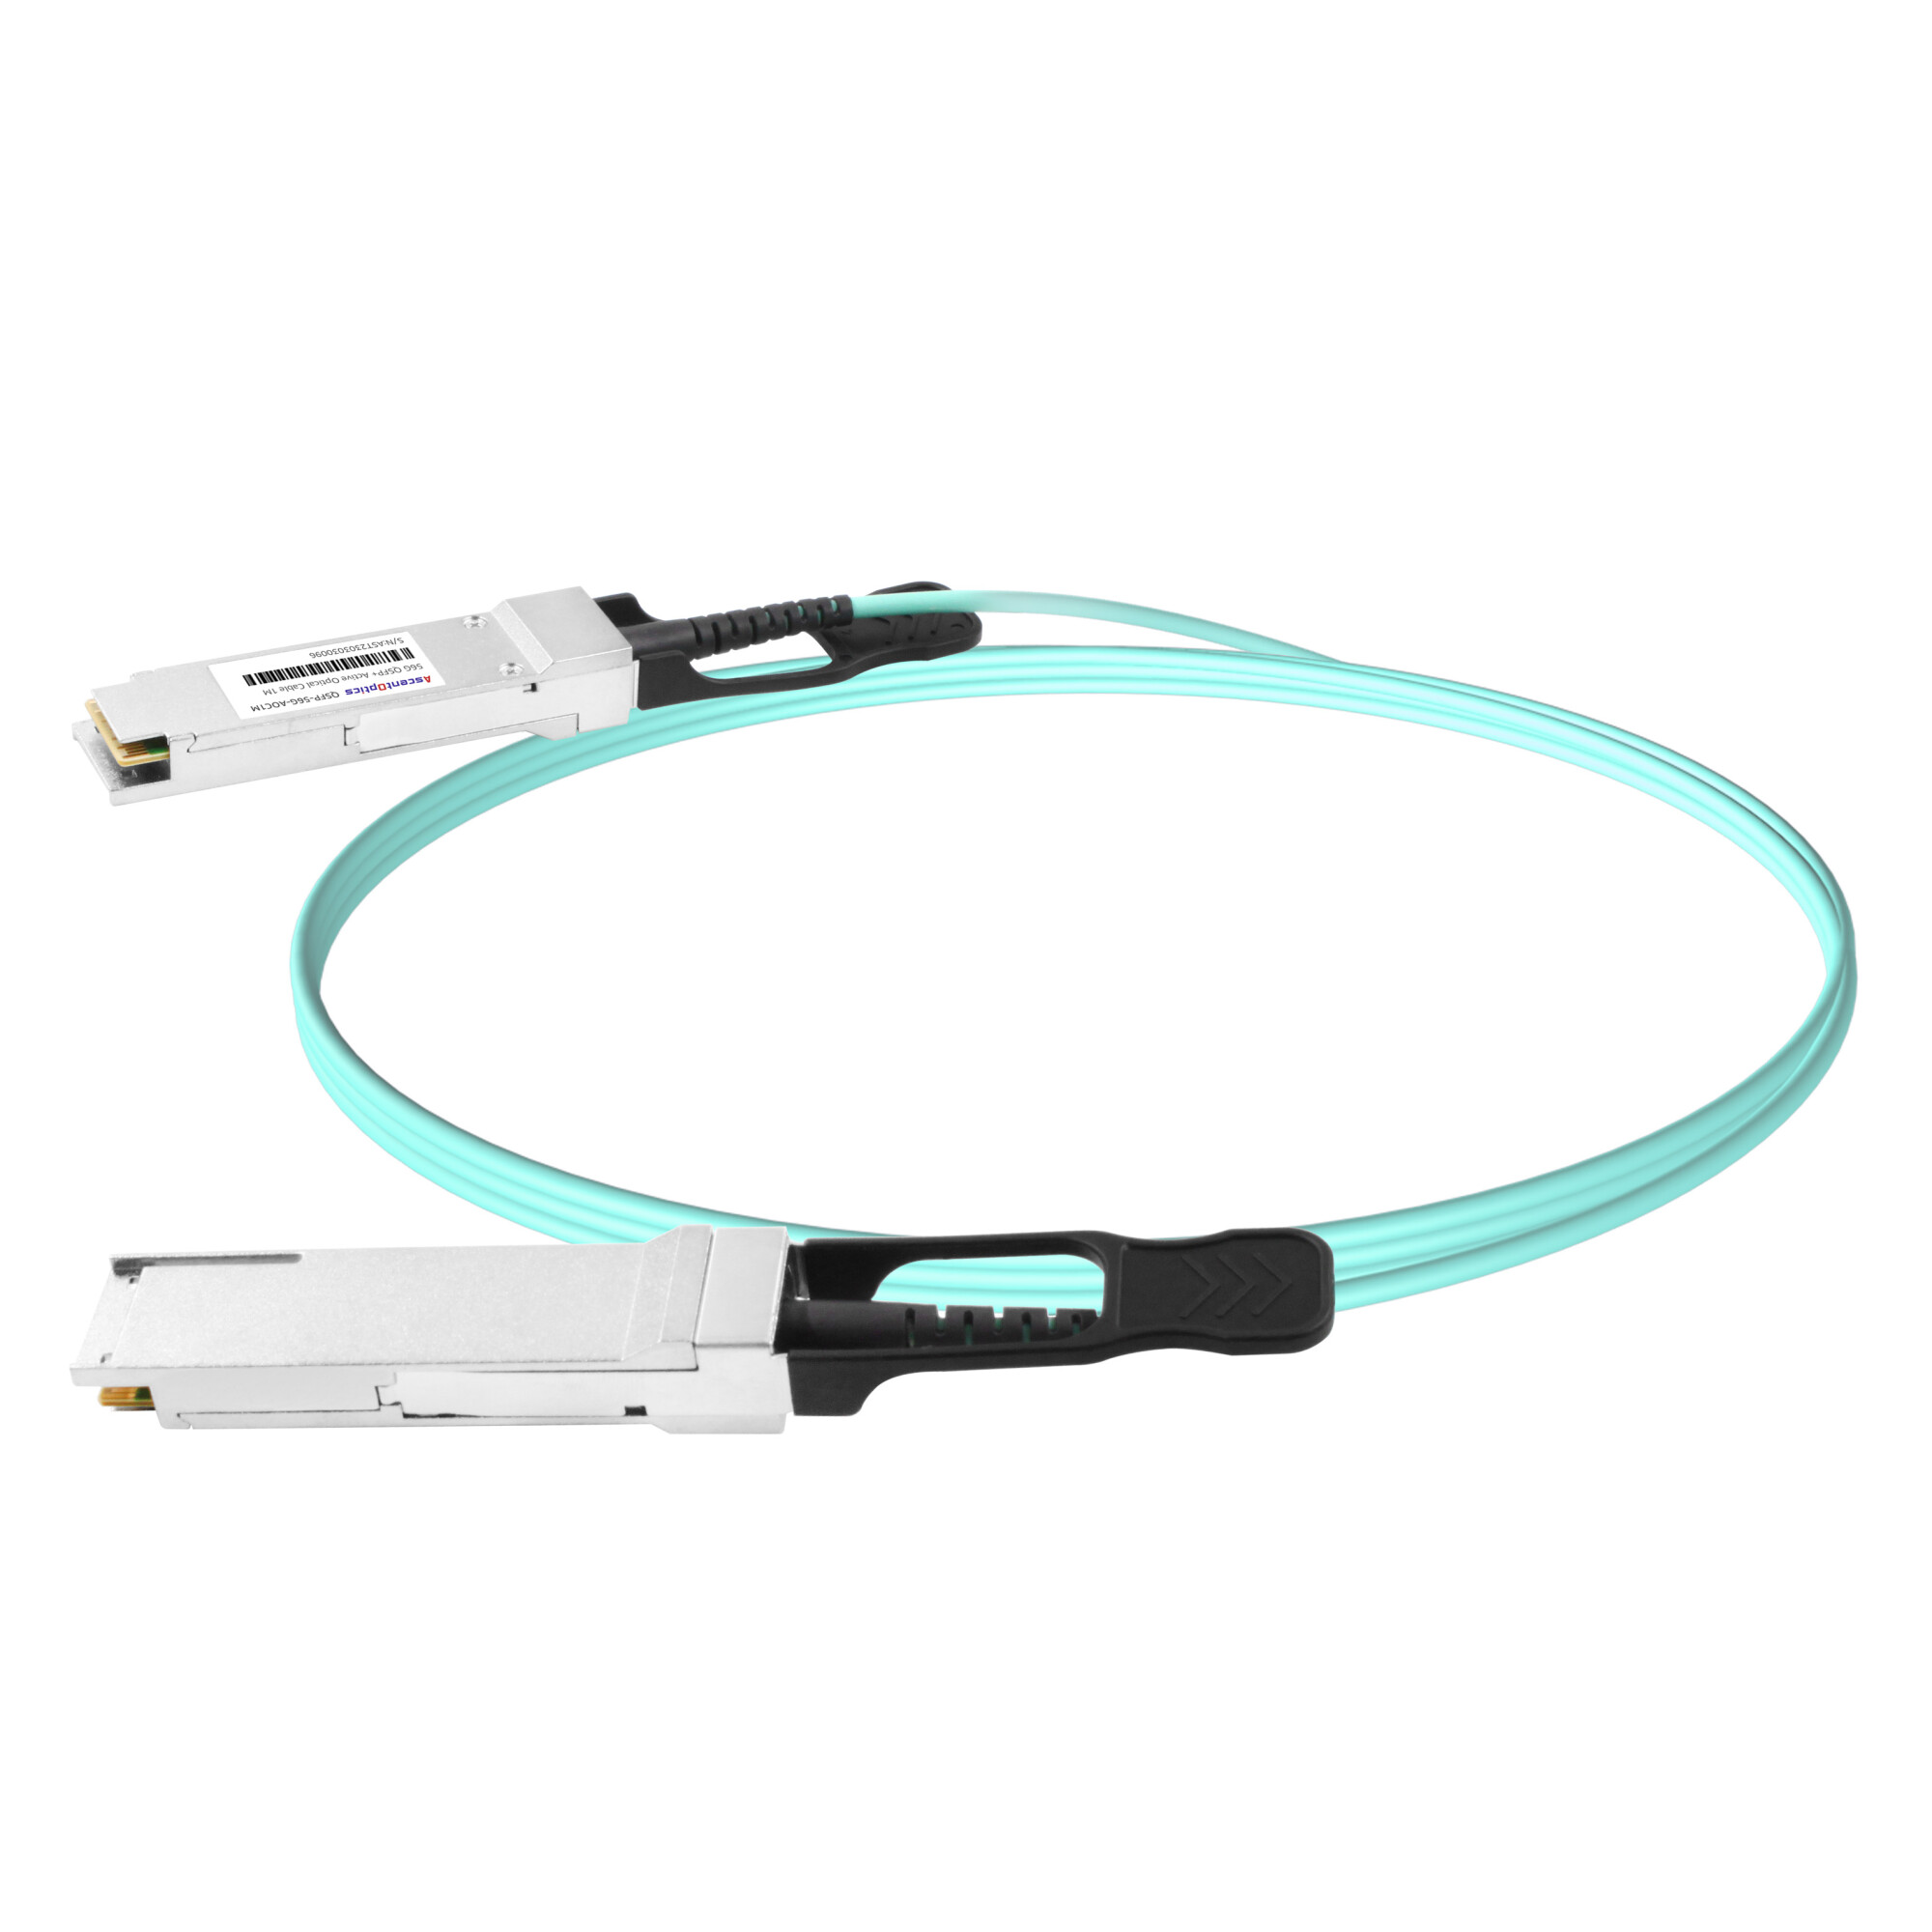 56G QSFP+ Active Optical Cable,1 Meter